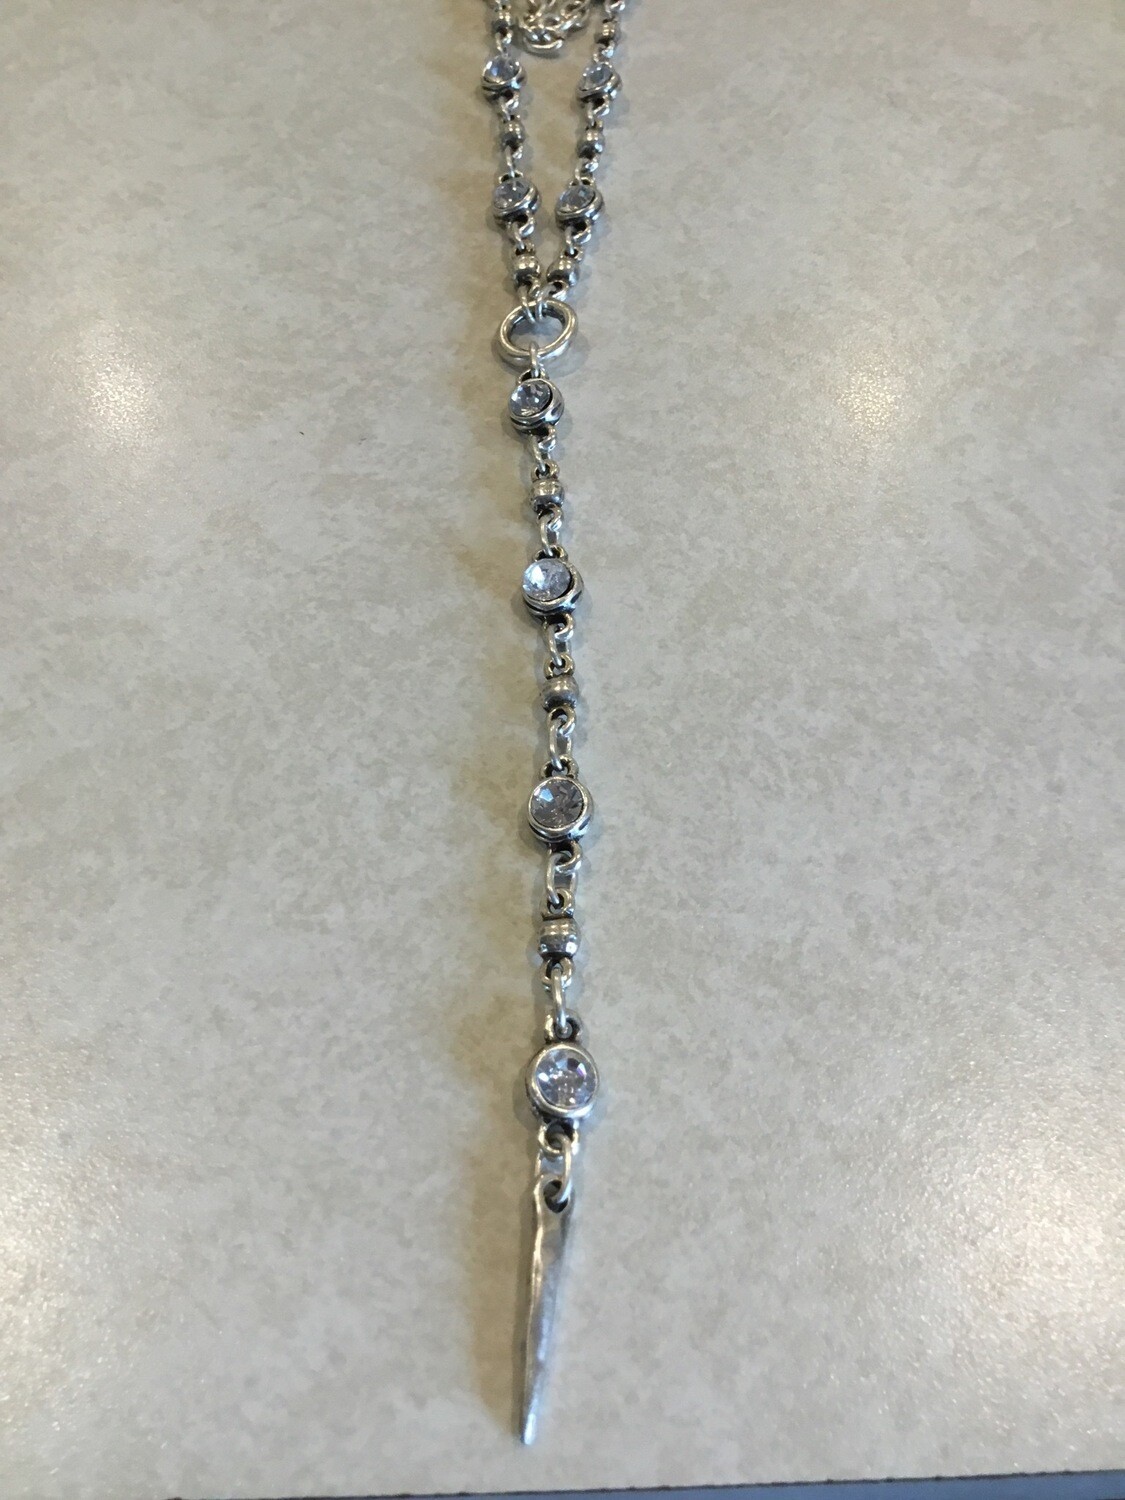 Handmade Pewter Long Necklace With Small Clear Crystals And Crystal Drop